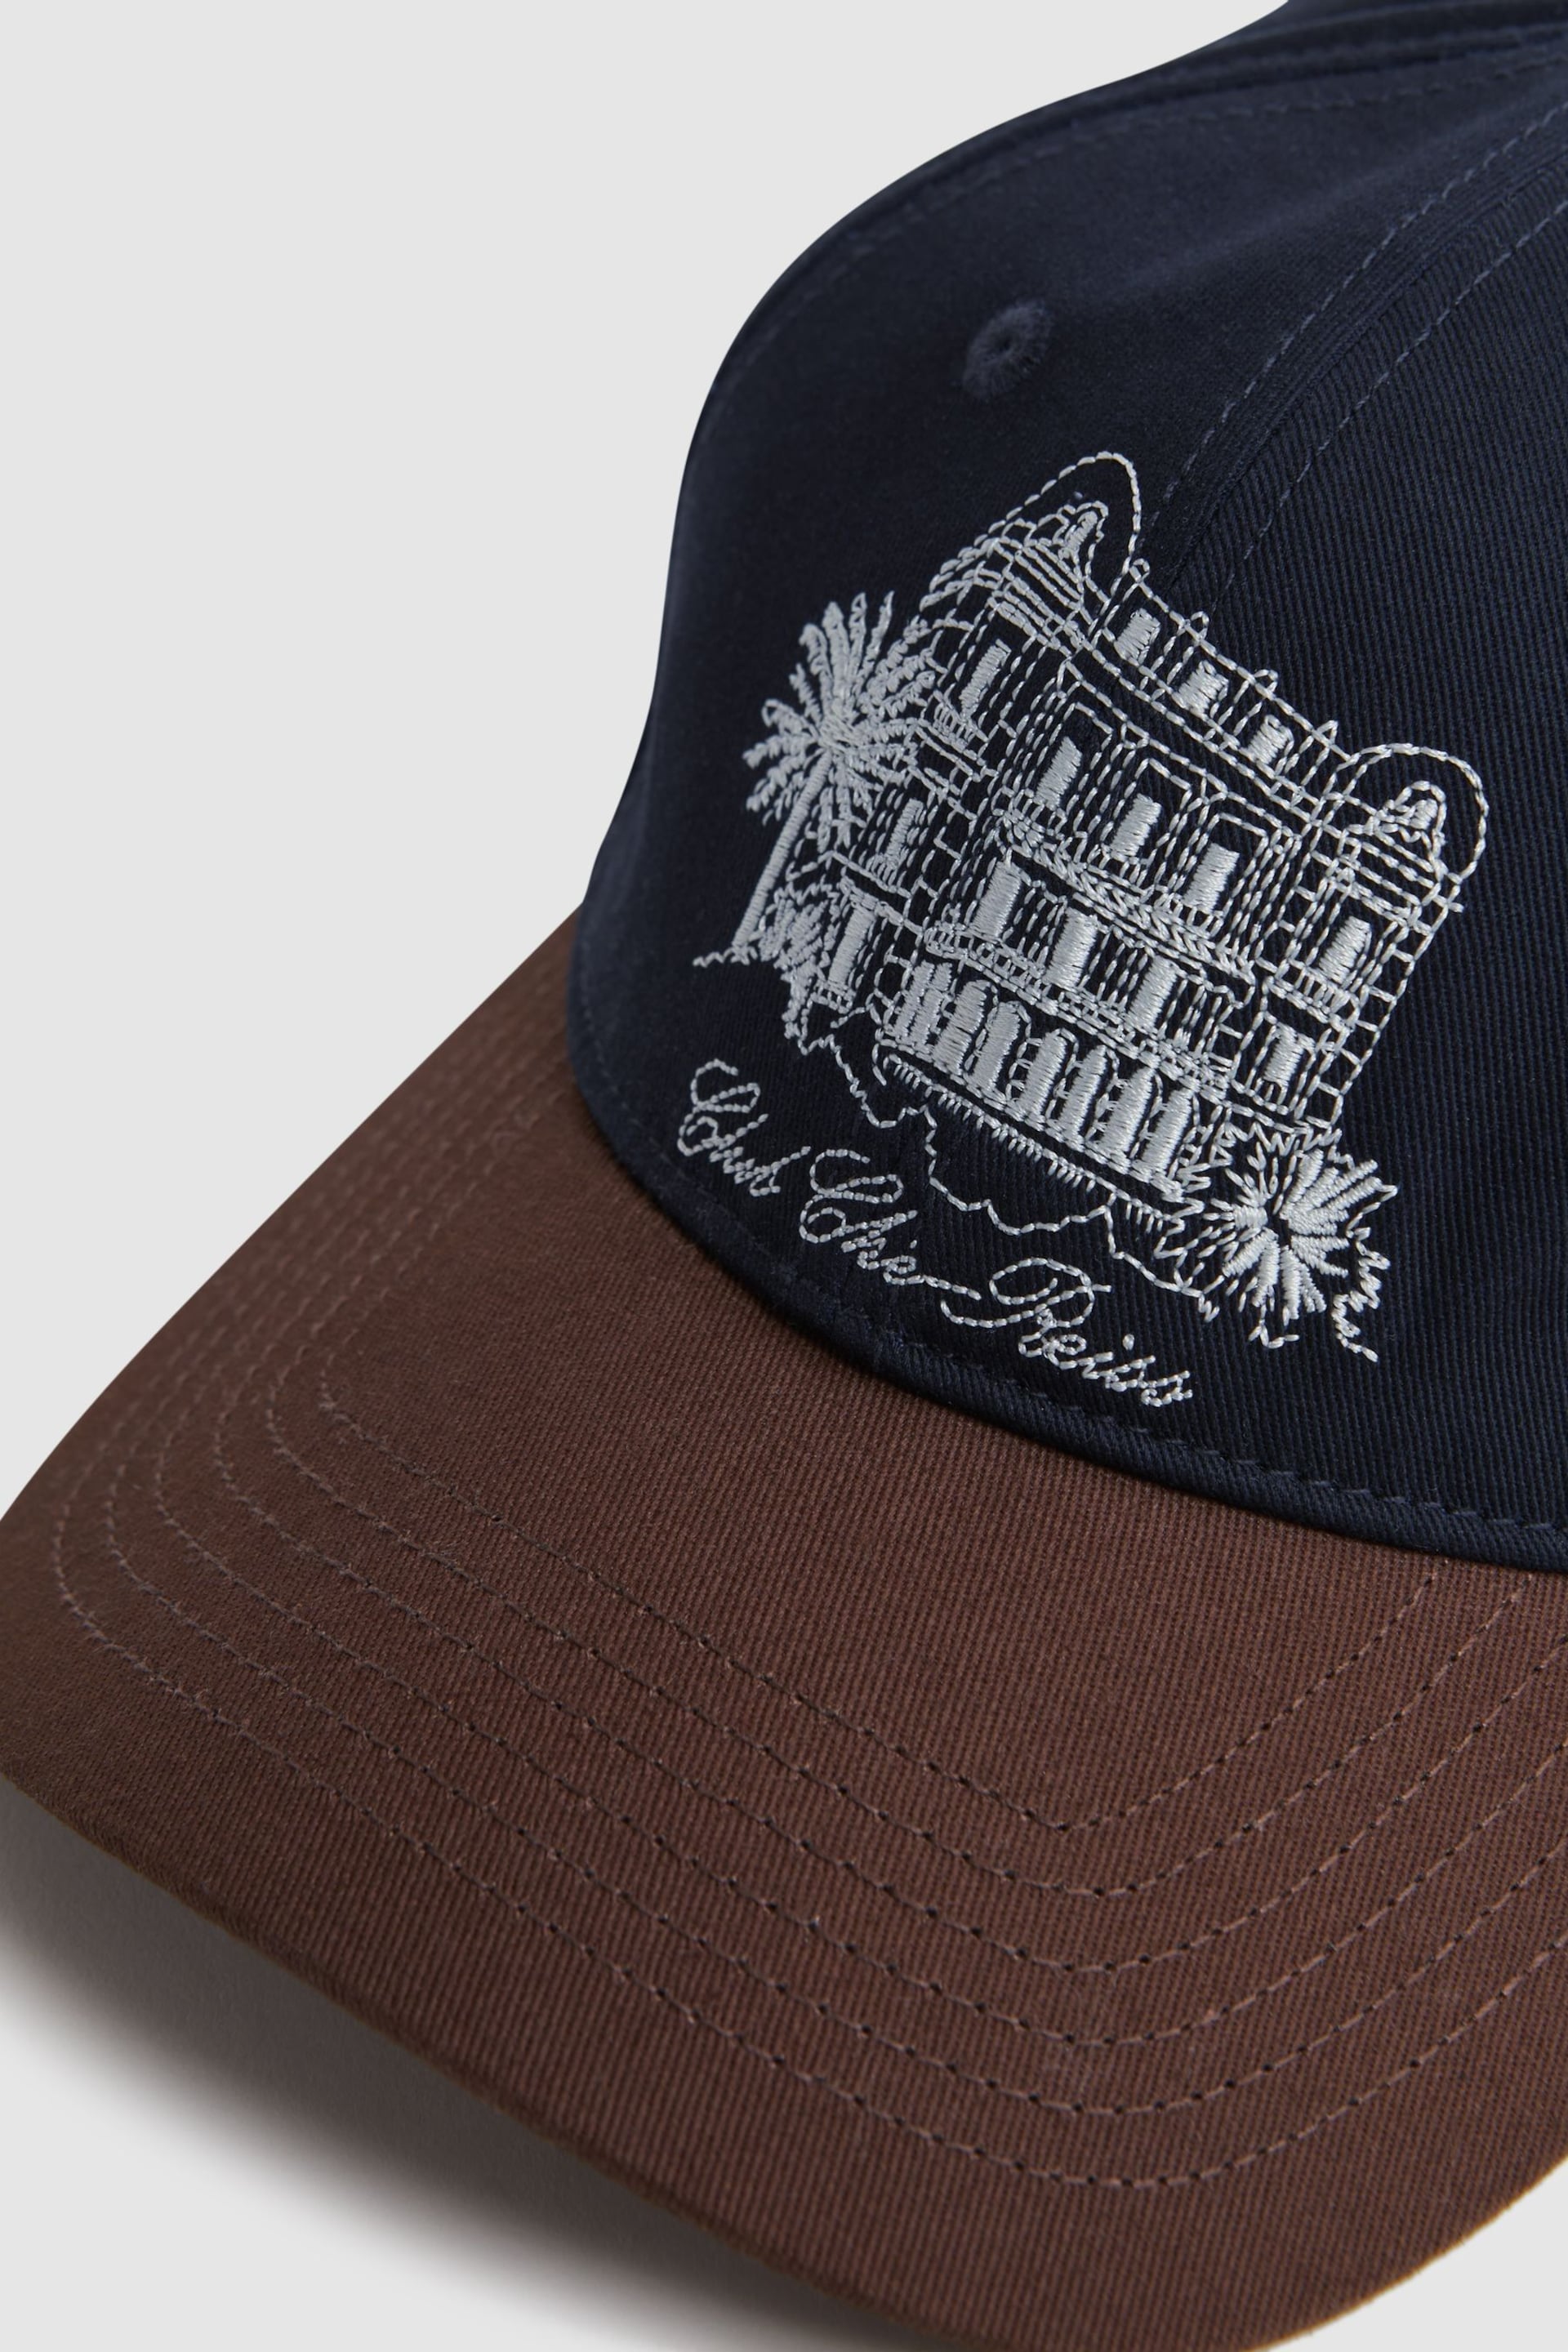 Reiss Navy/Tobacco Palermo Reiss | Ché Embroidered Baseball Cap - Image 3 of 4